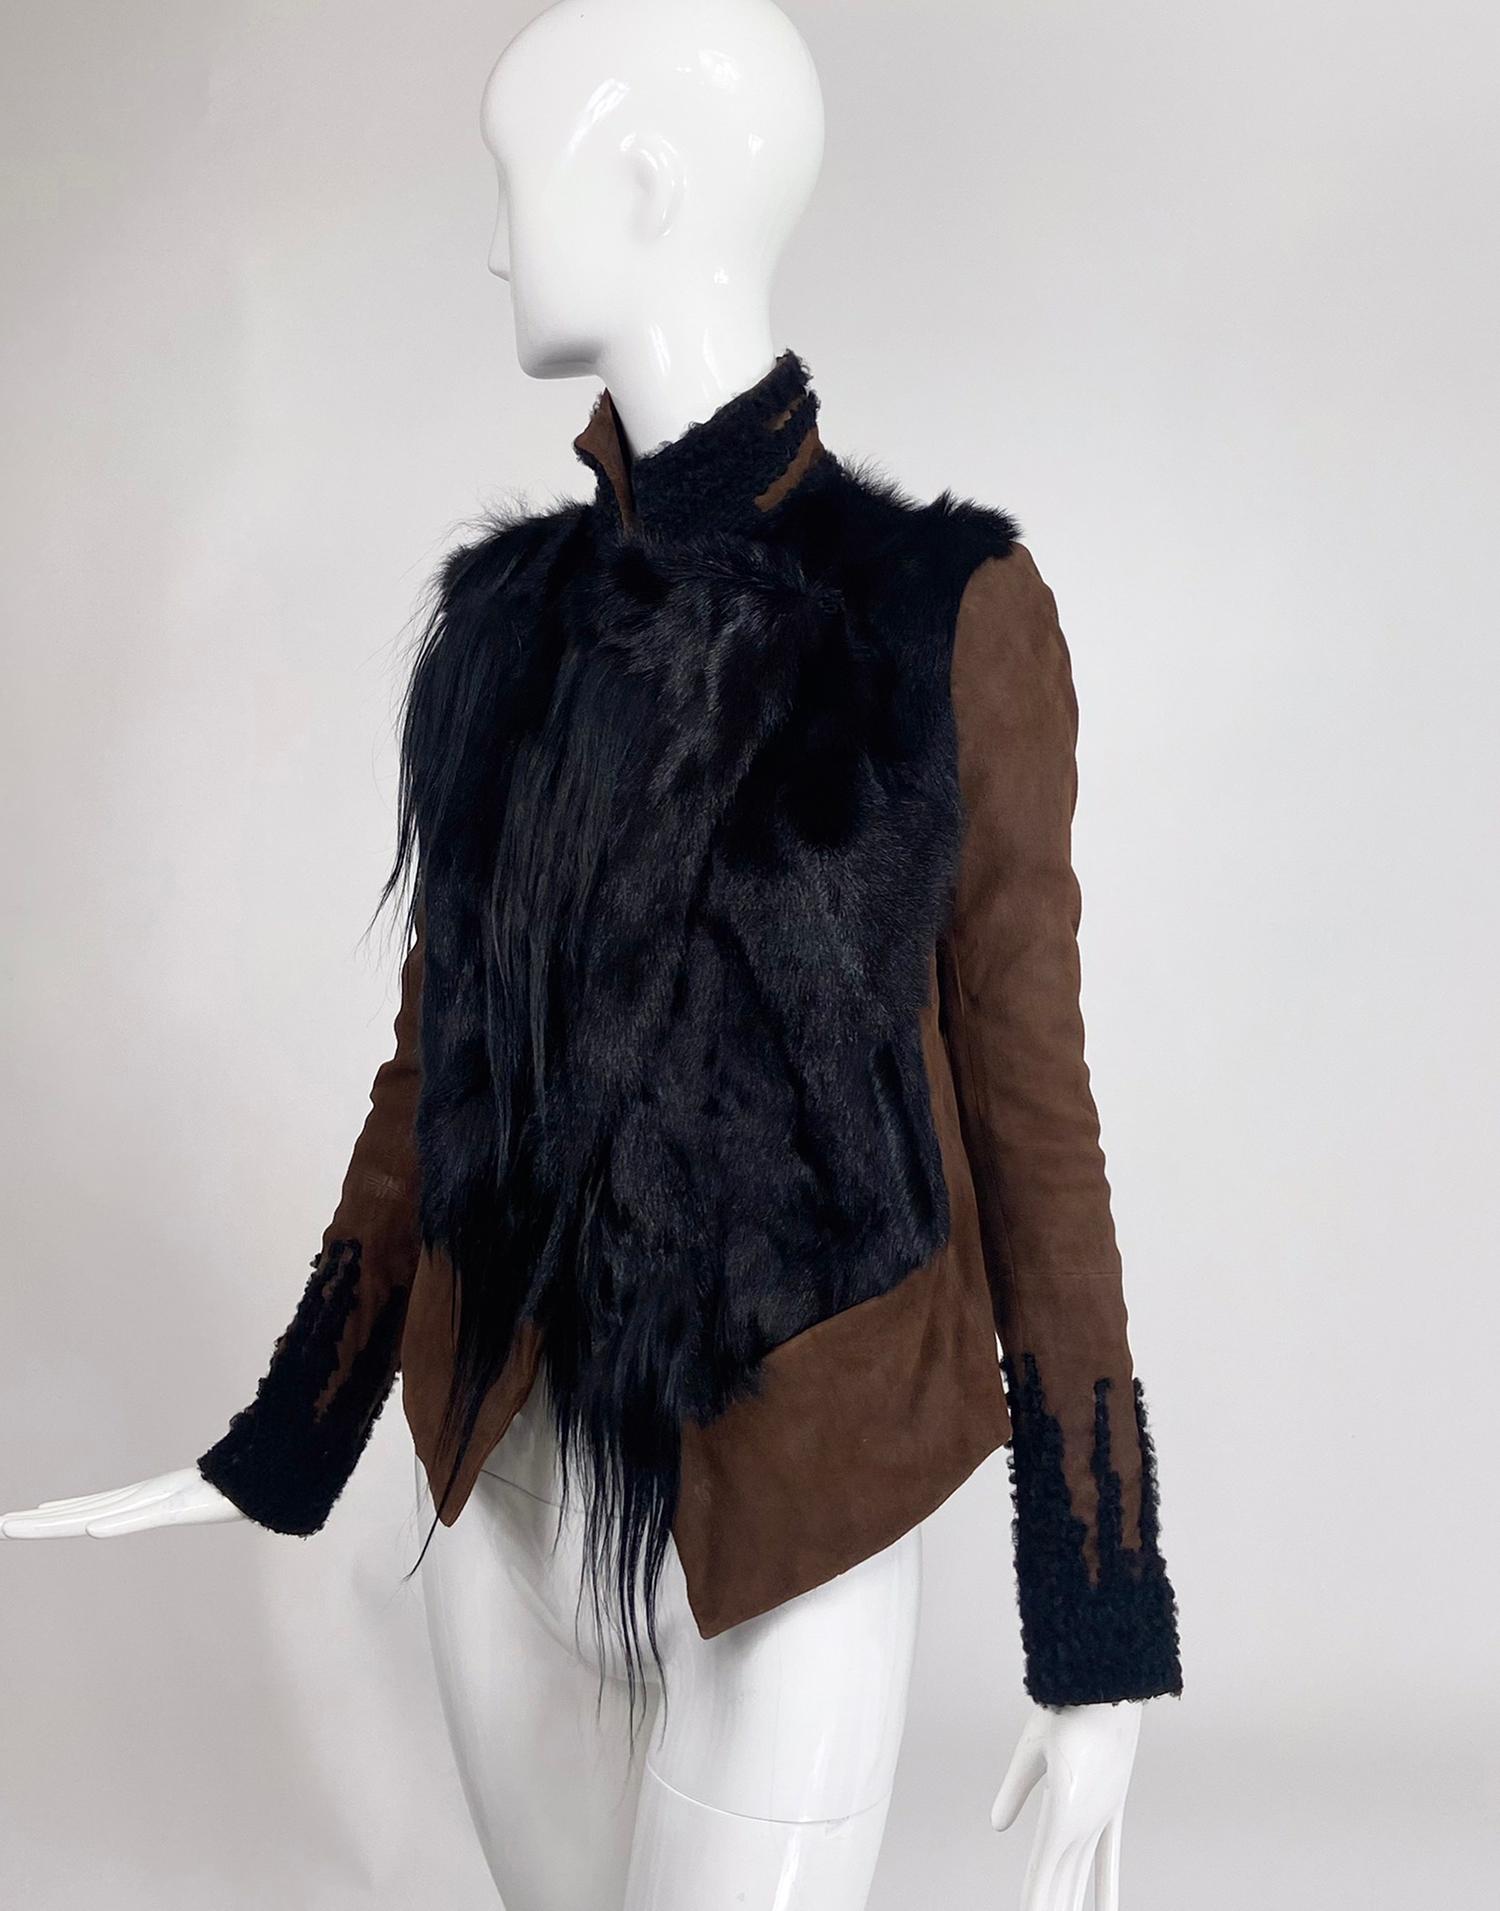 Donna Karan runway Fall 2014, her 30 year anniversary collection. Look 30 from the collection,chocolate brown suede & black shearling and goat hair jacket. This gorgeous jacket has a chic Bohemian feel, great to pair with your favourite jeans or a